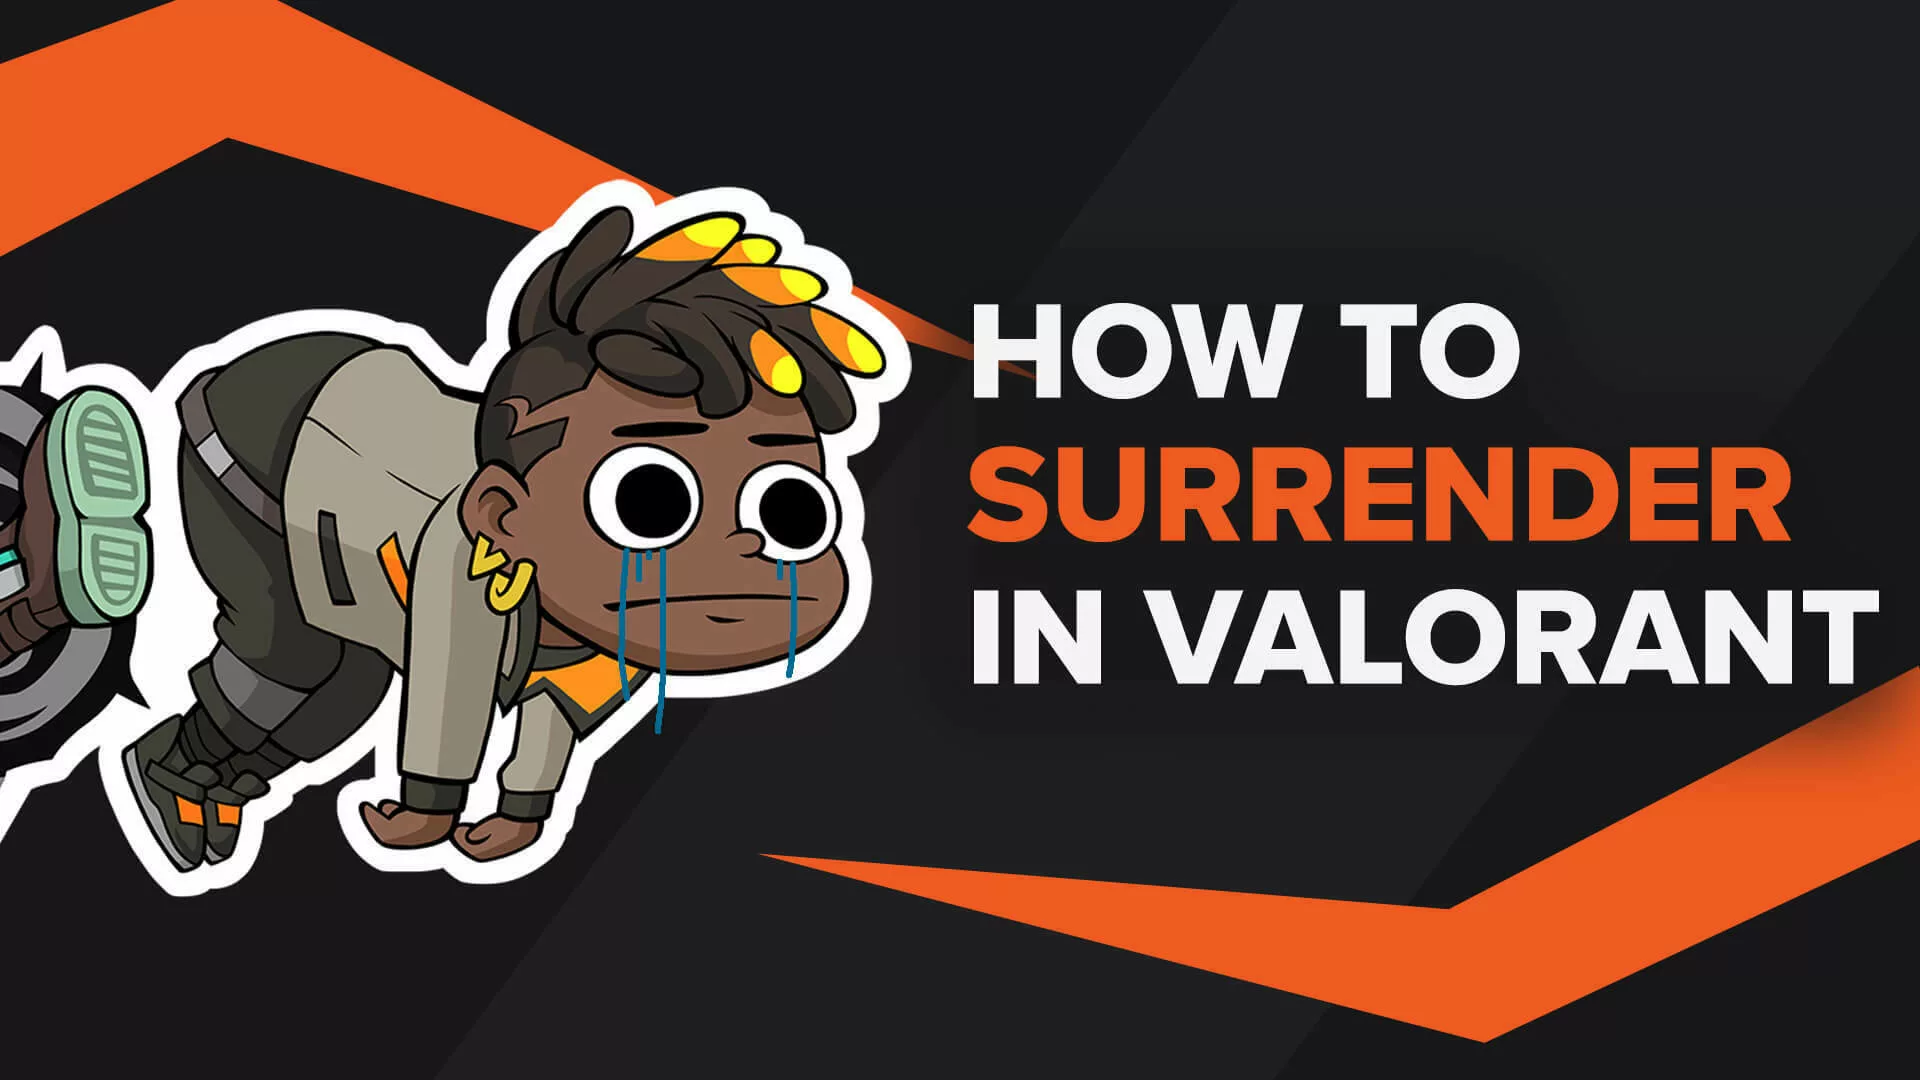 How To Surrender in Valorant: Step by Step Guide